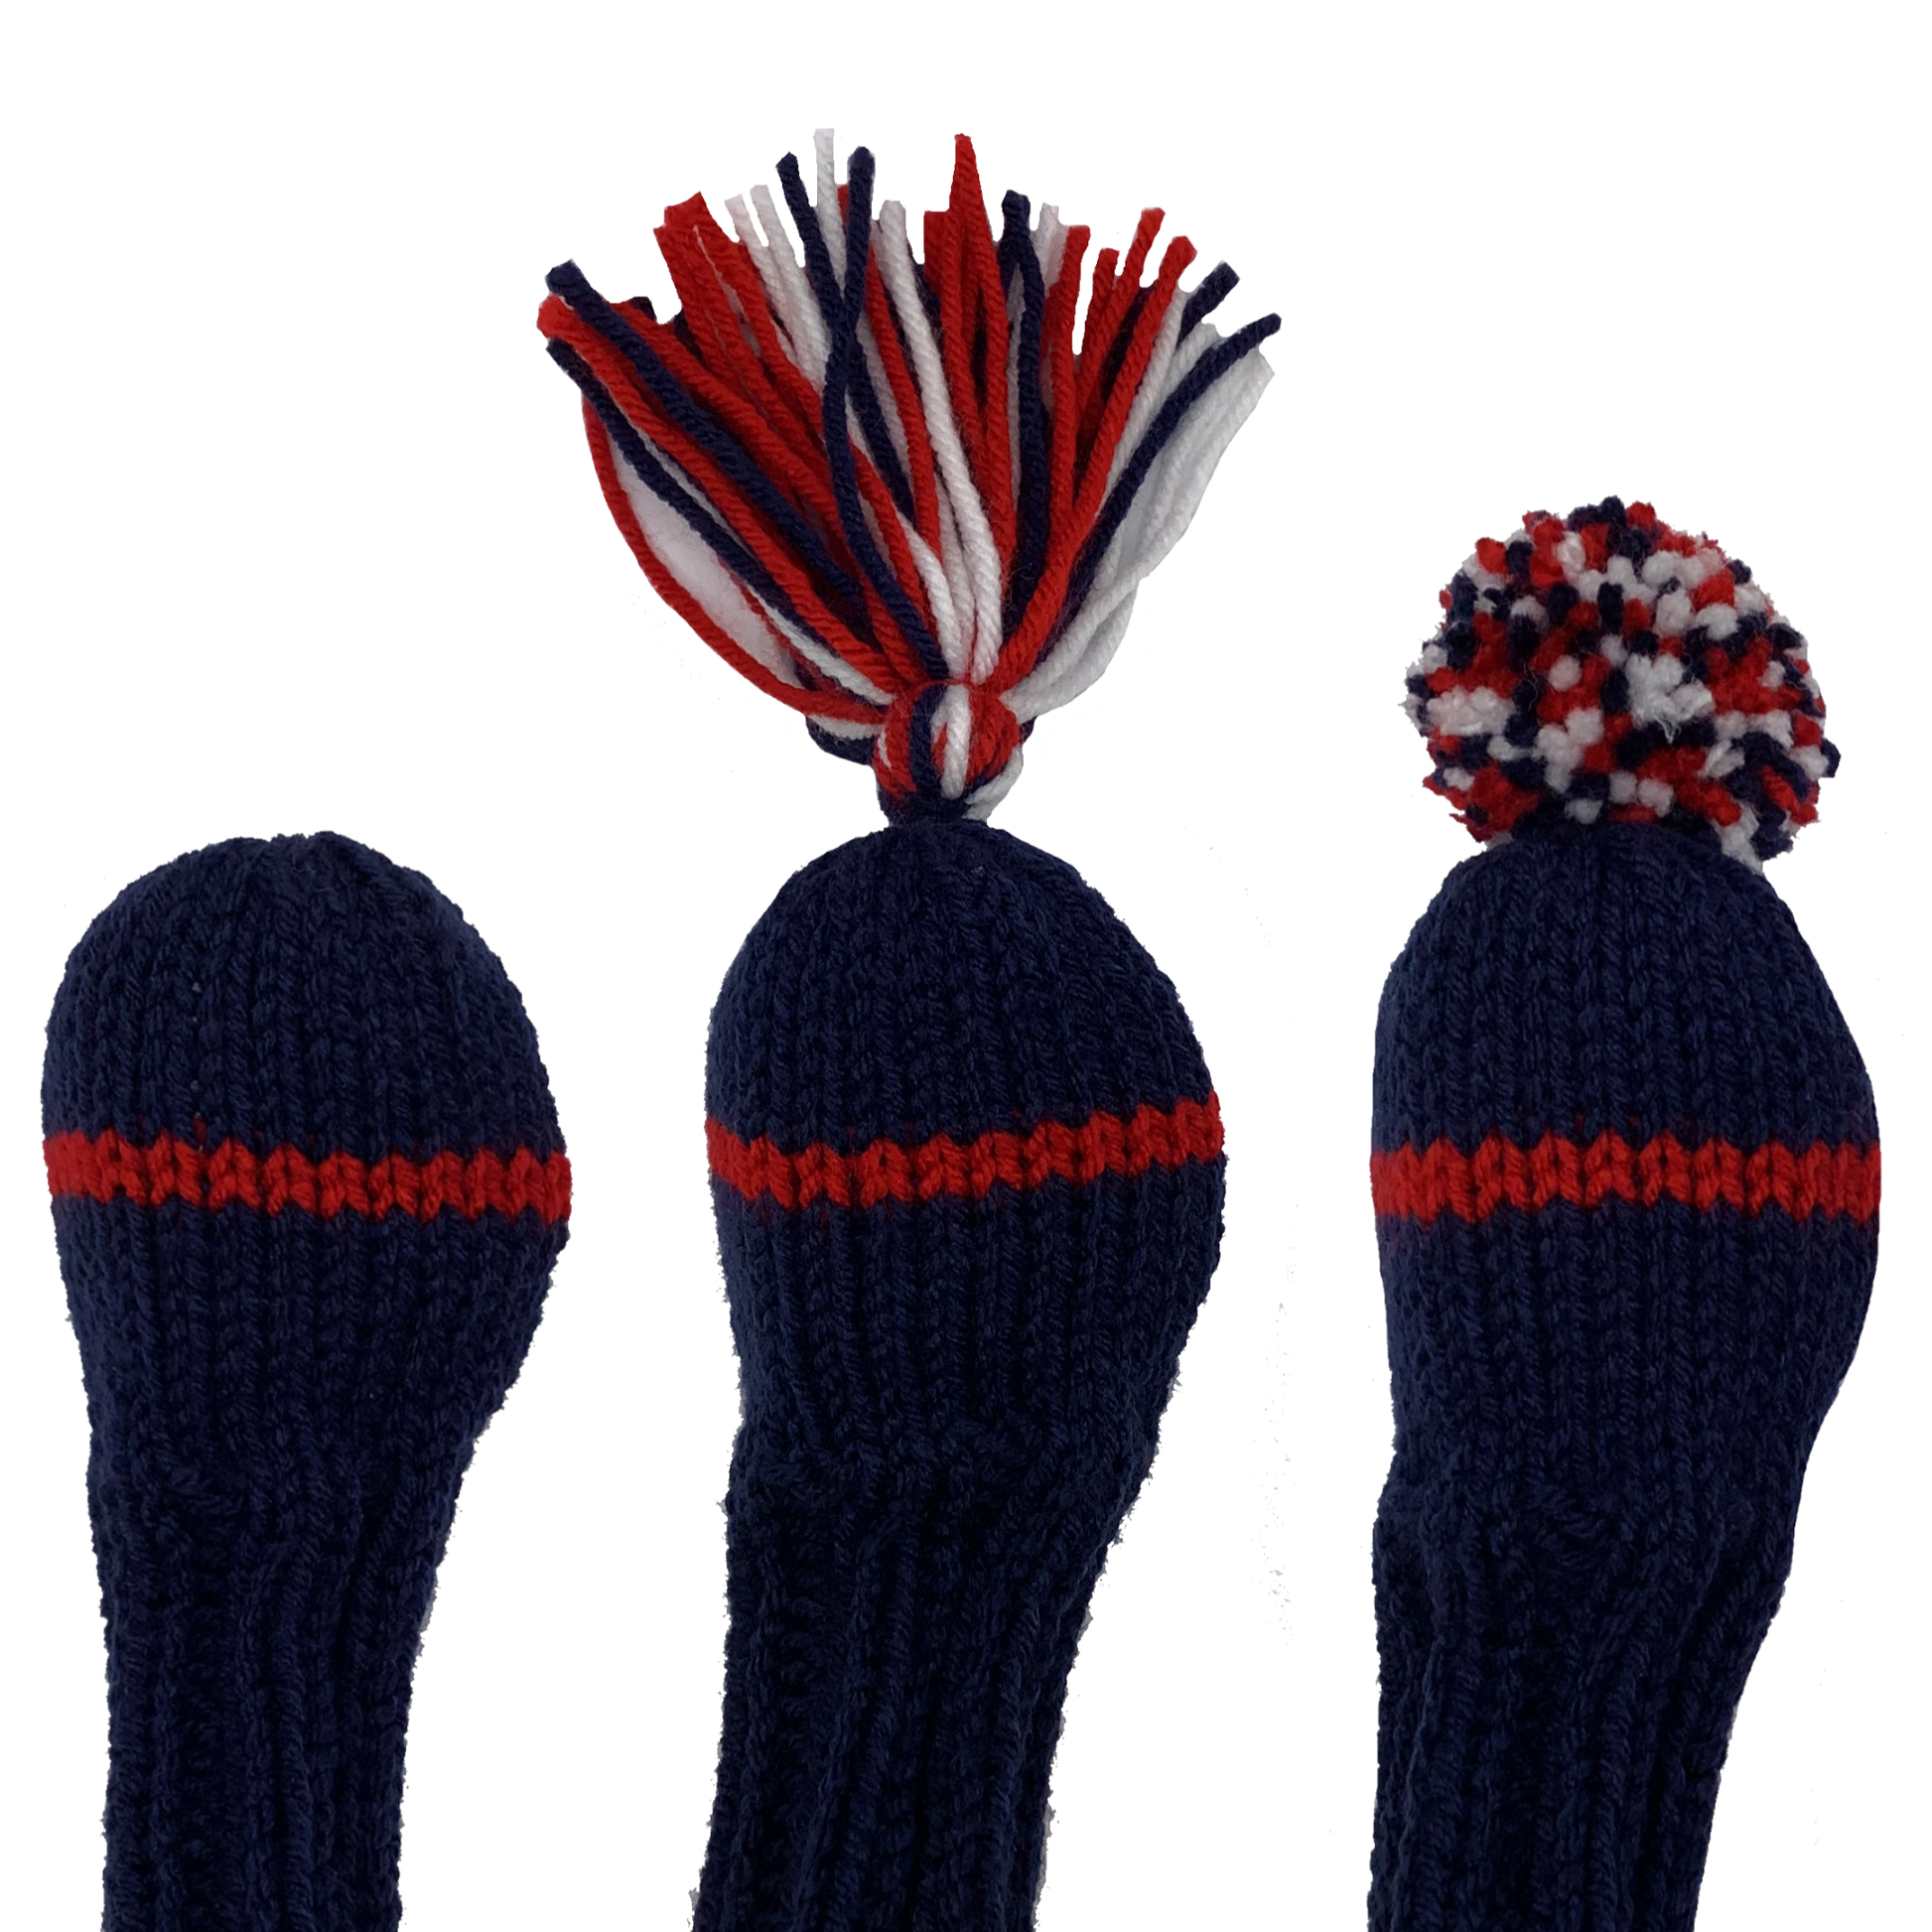 1 hybrid golf club knit headcover in navy blue with one stripe in red and the option of adding a red, navy and white tassel or pom-pom.